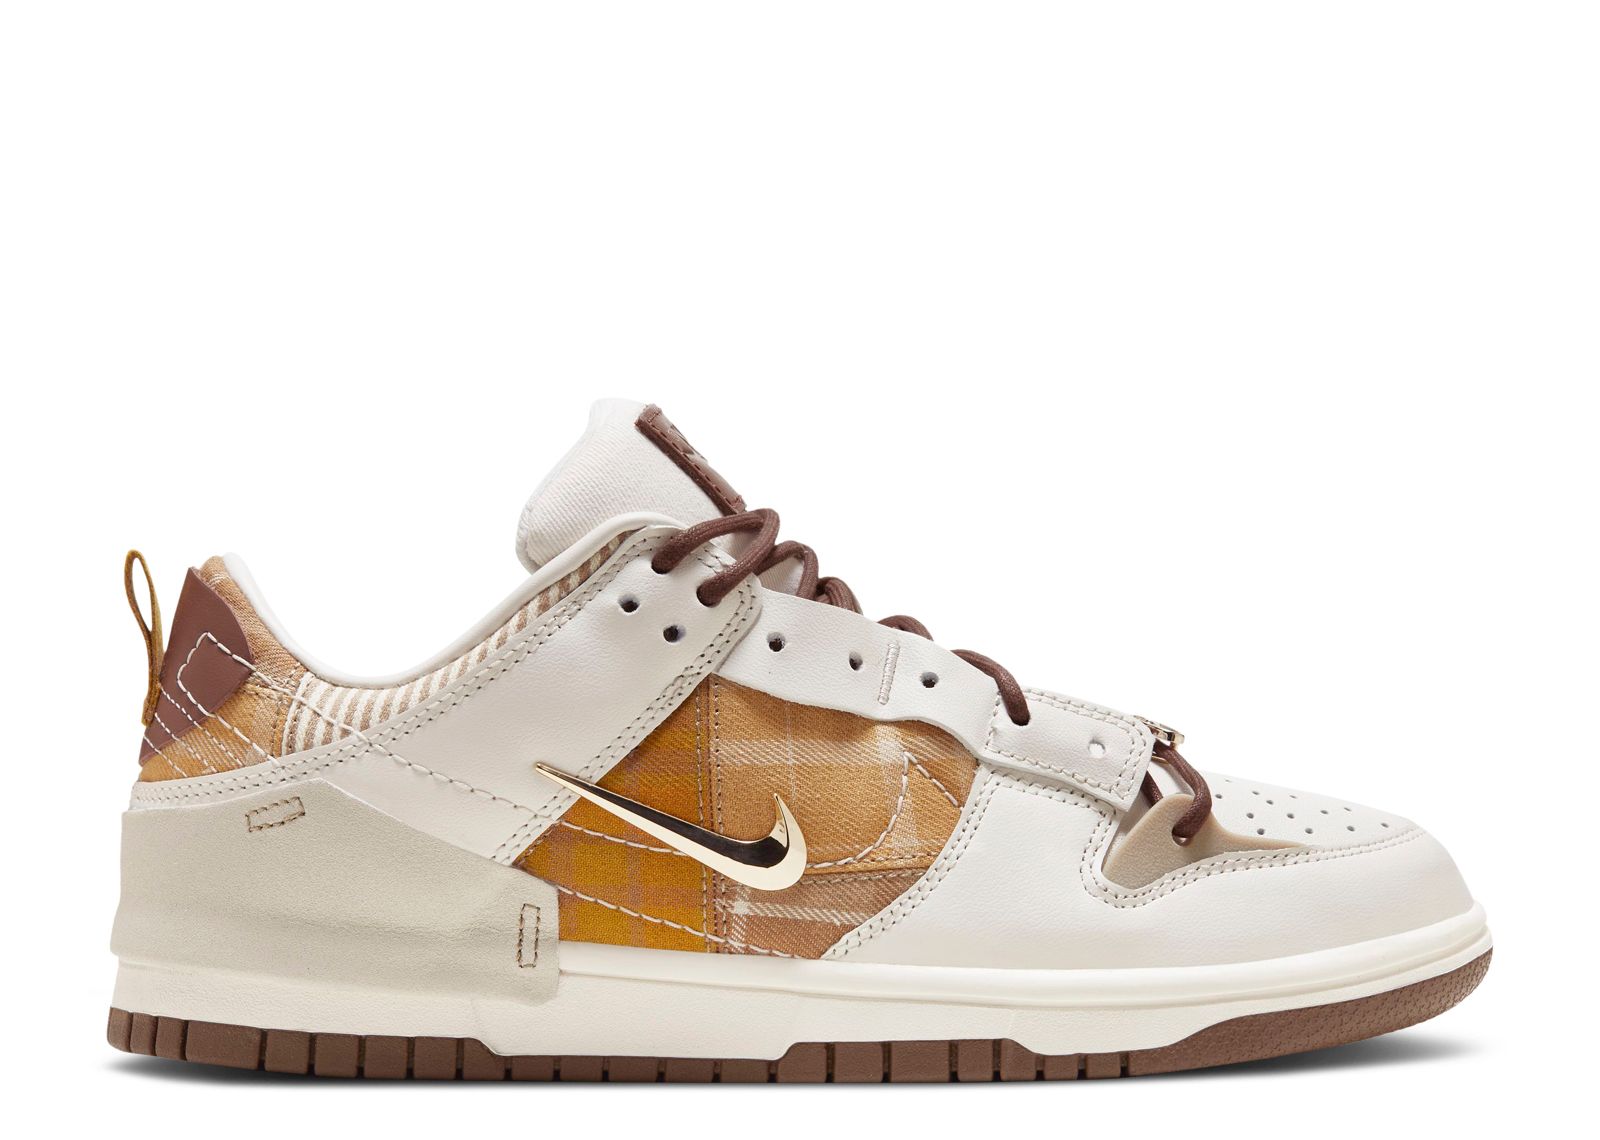 Wmns Dunk Low Disrupt 2 'Cacao Wow Plaid' - Nike - FV3640 071